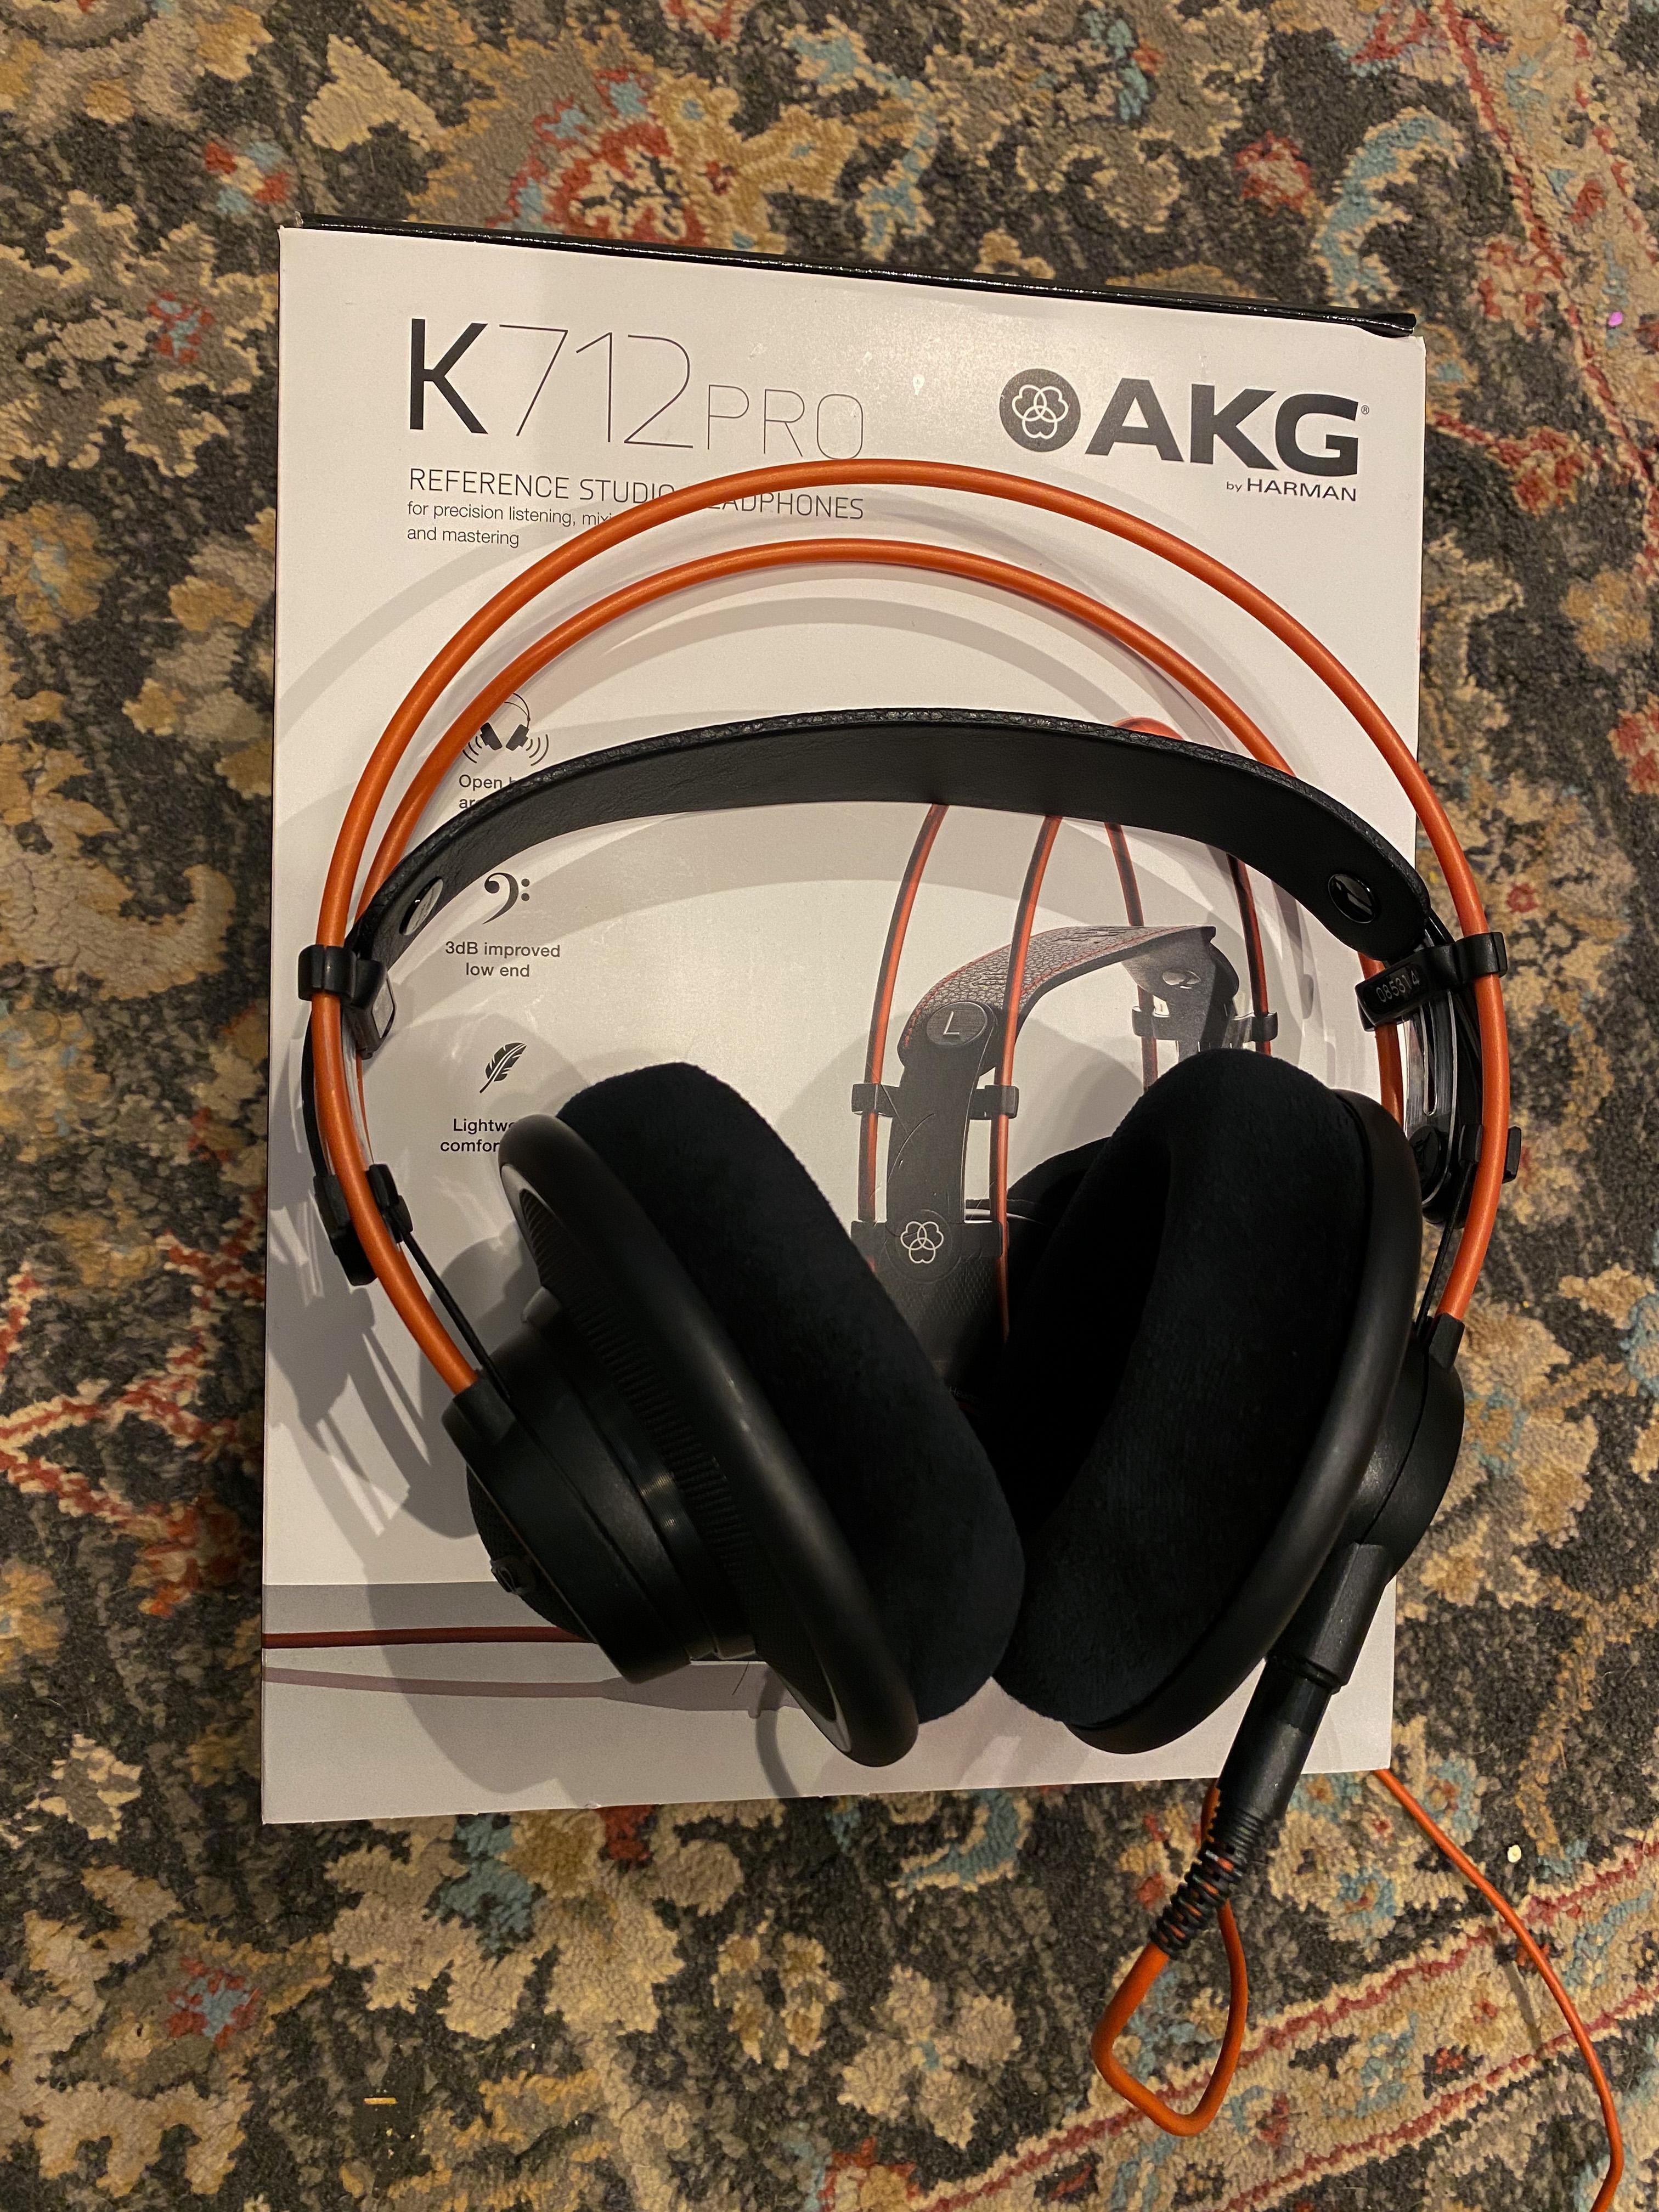 Used AKG K712 Pro Open-back Mastering and Reference Headphones